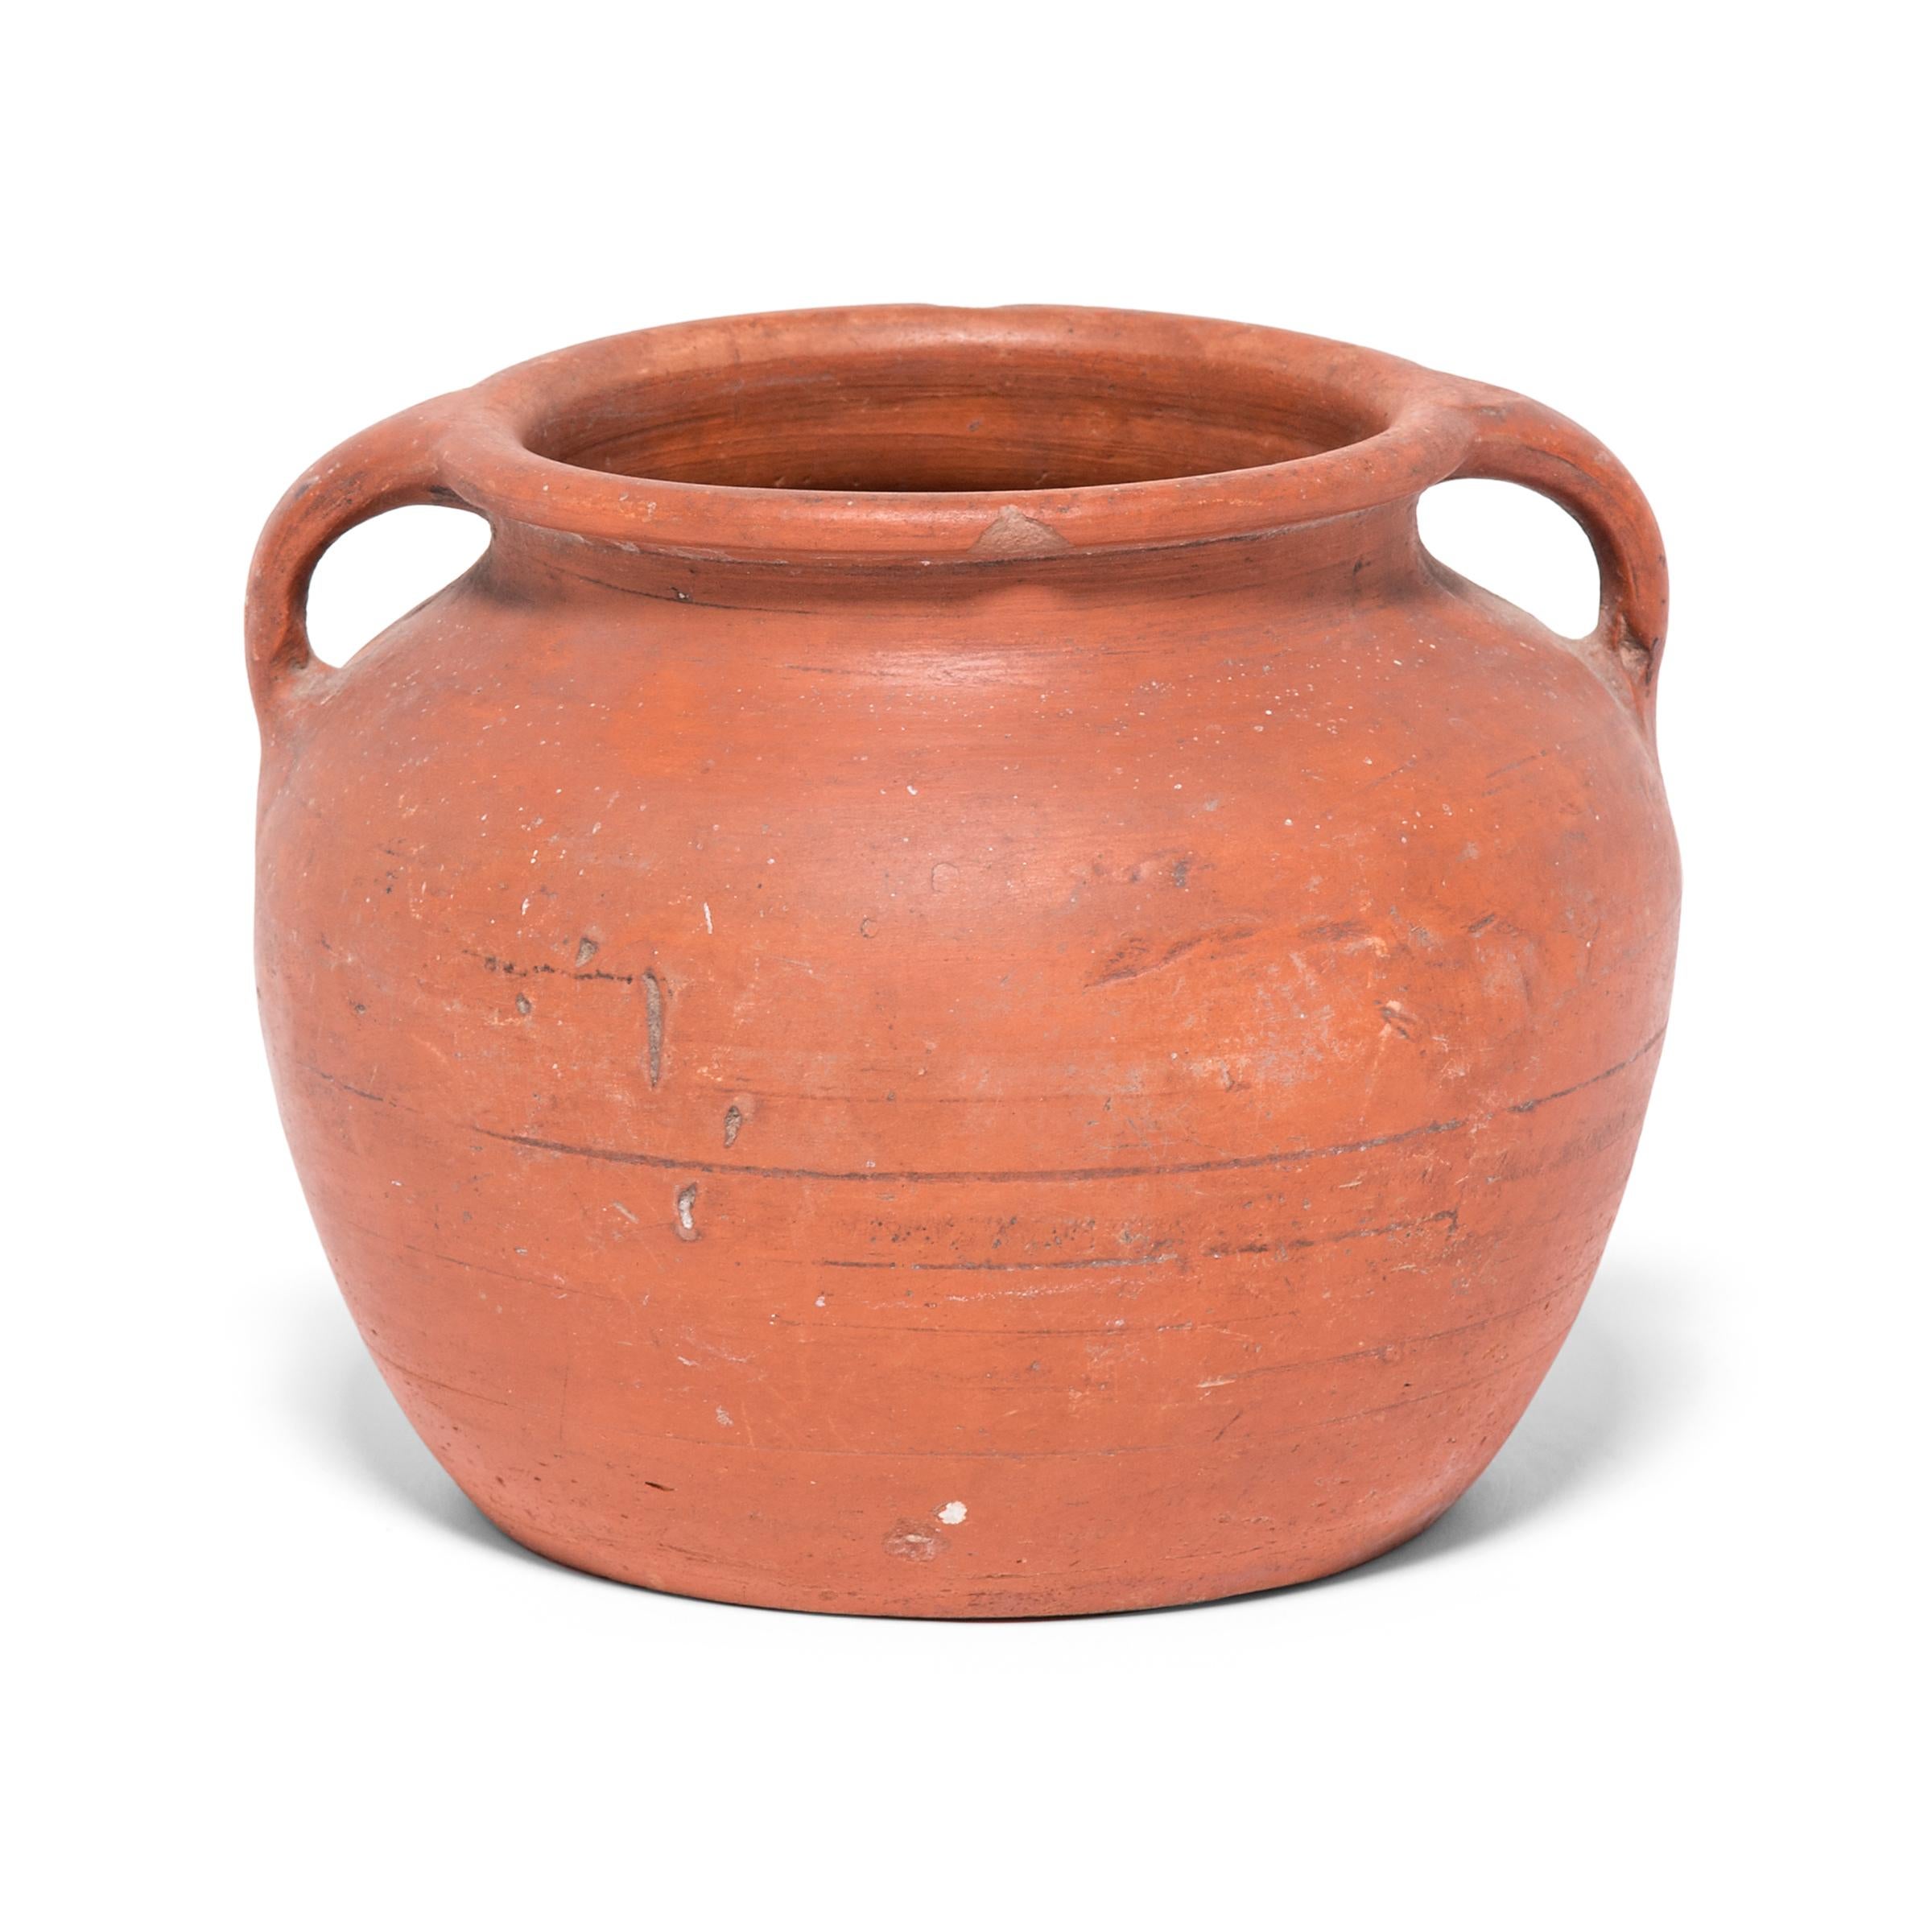 Rustic Early 20th Century Chinese Terracotta Soup Pot